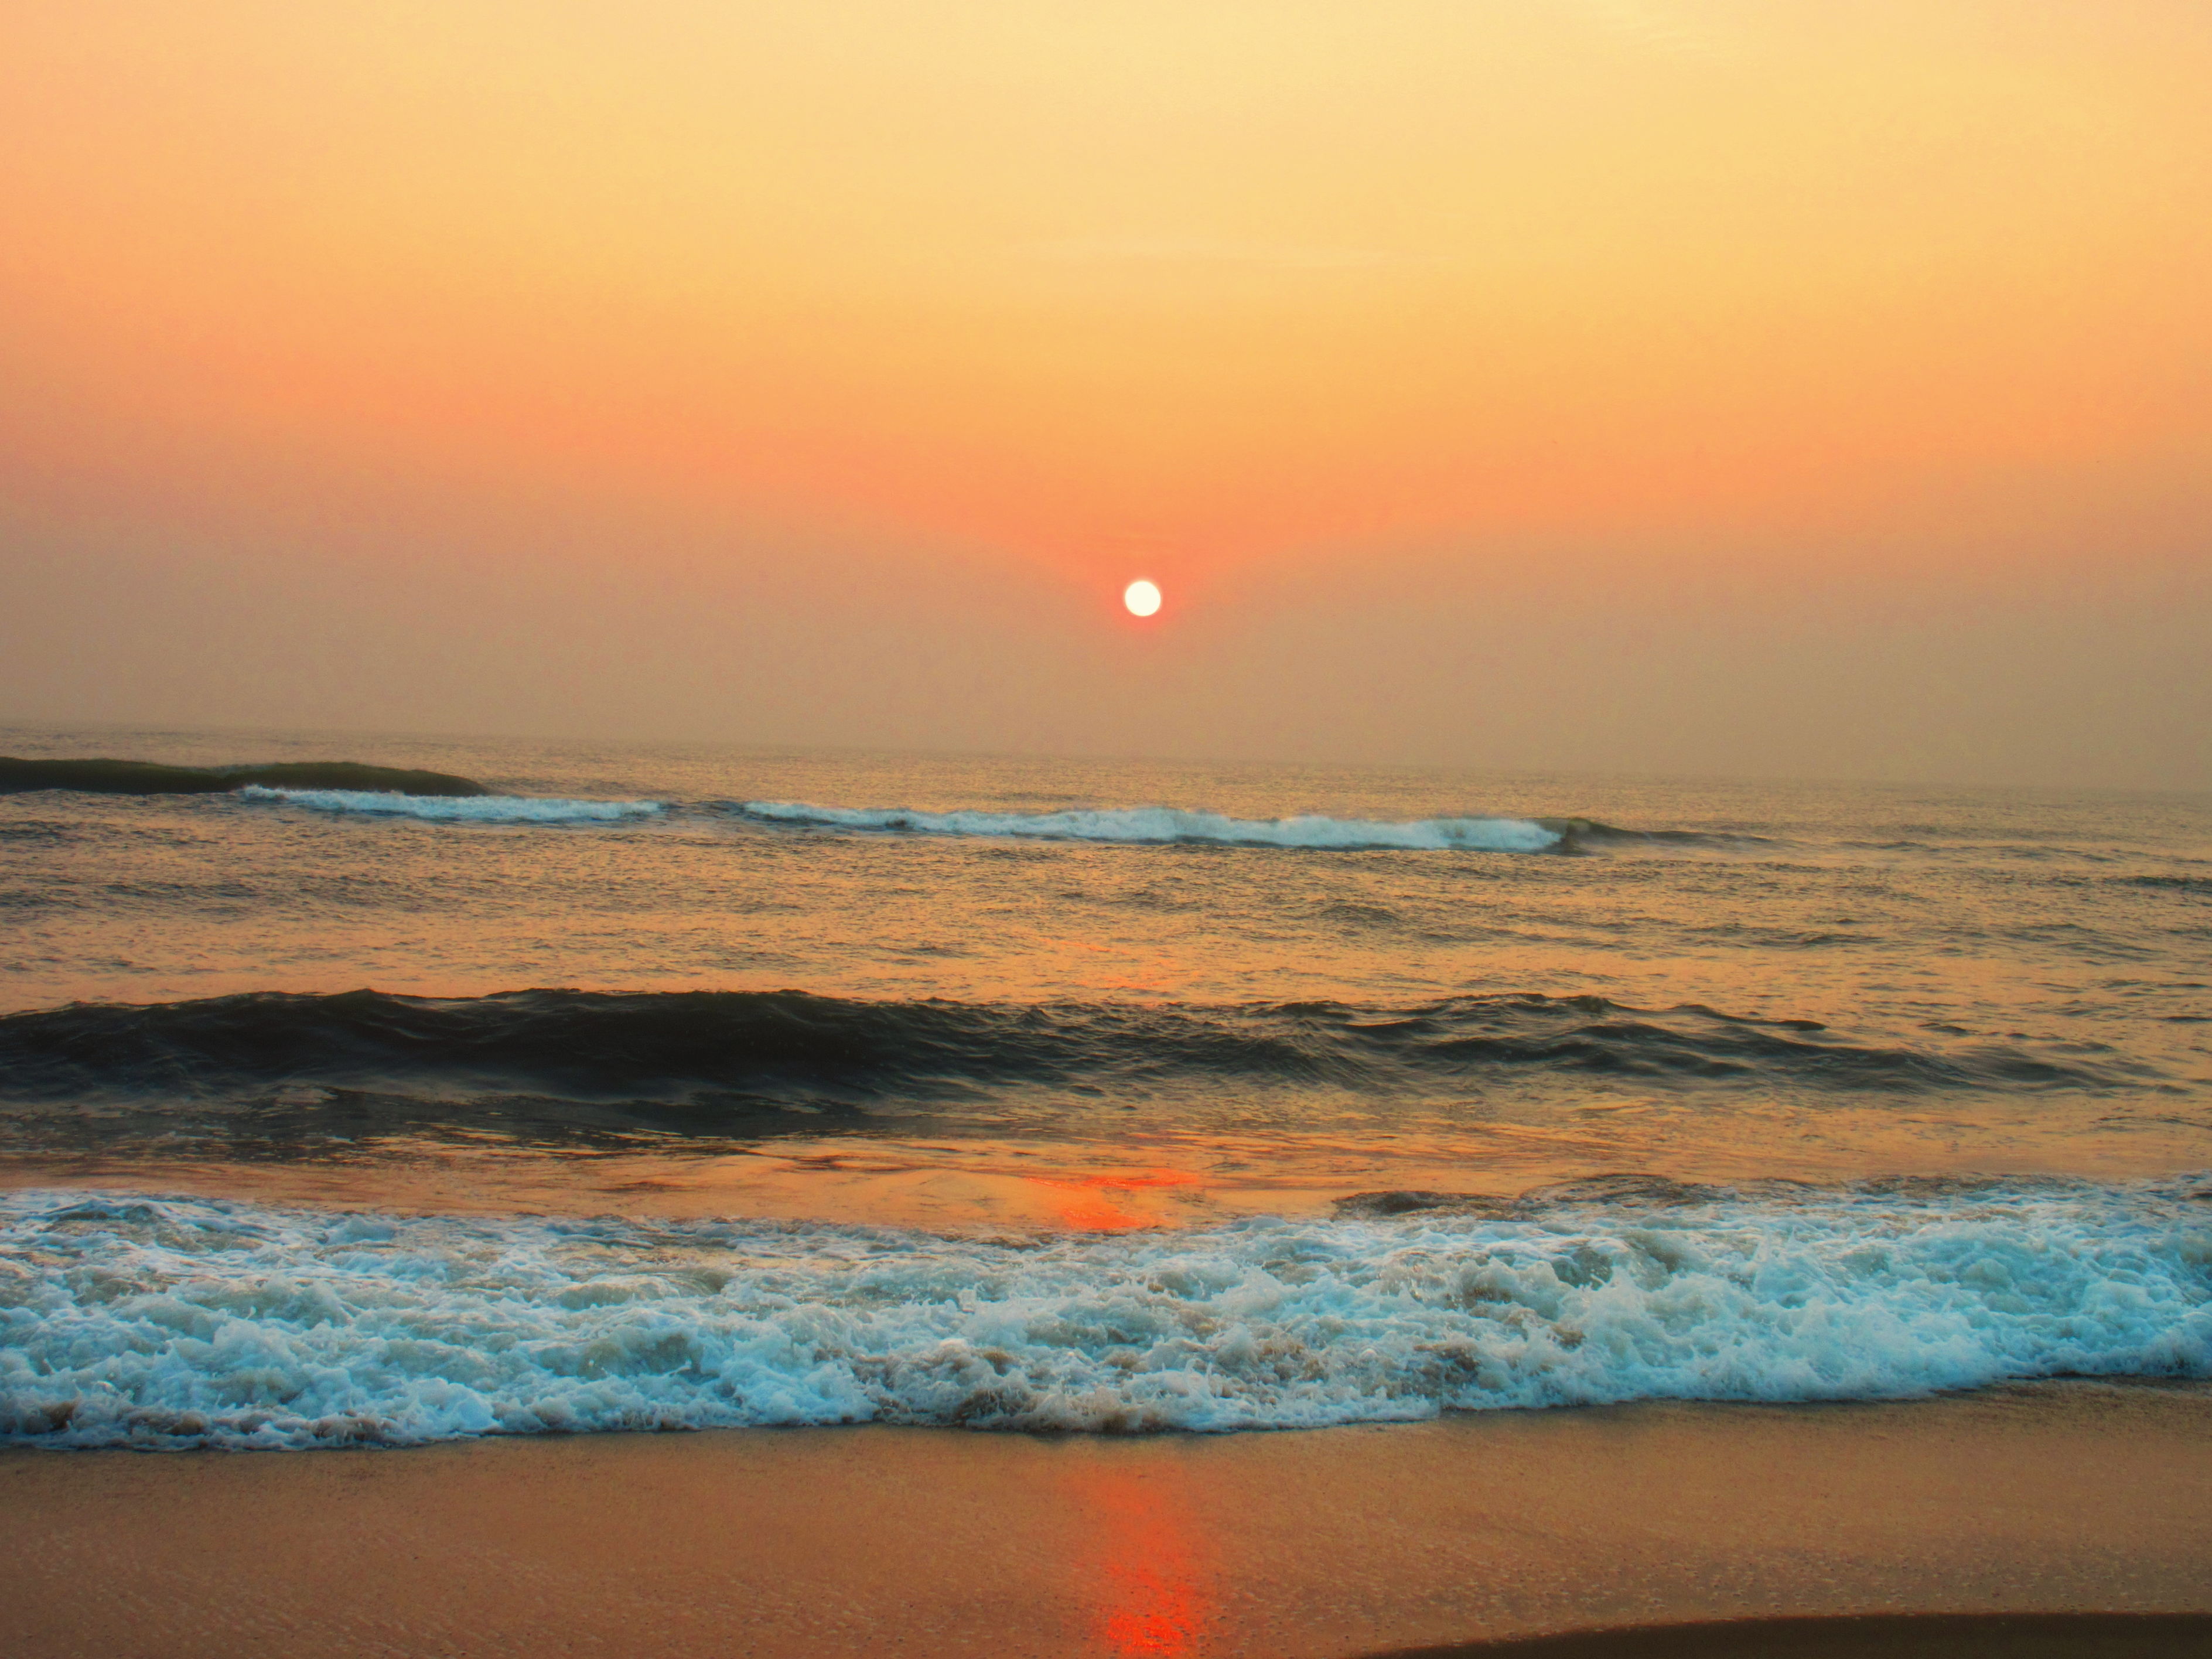 Silver beach at Cuddalore is just 30 km from Pondicherry